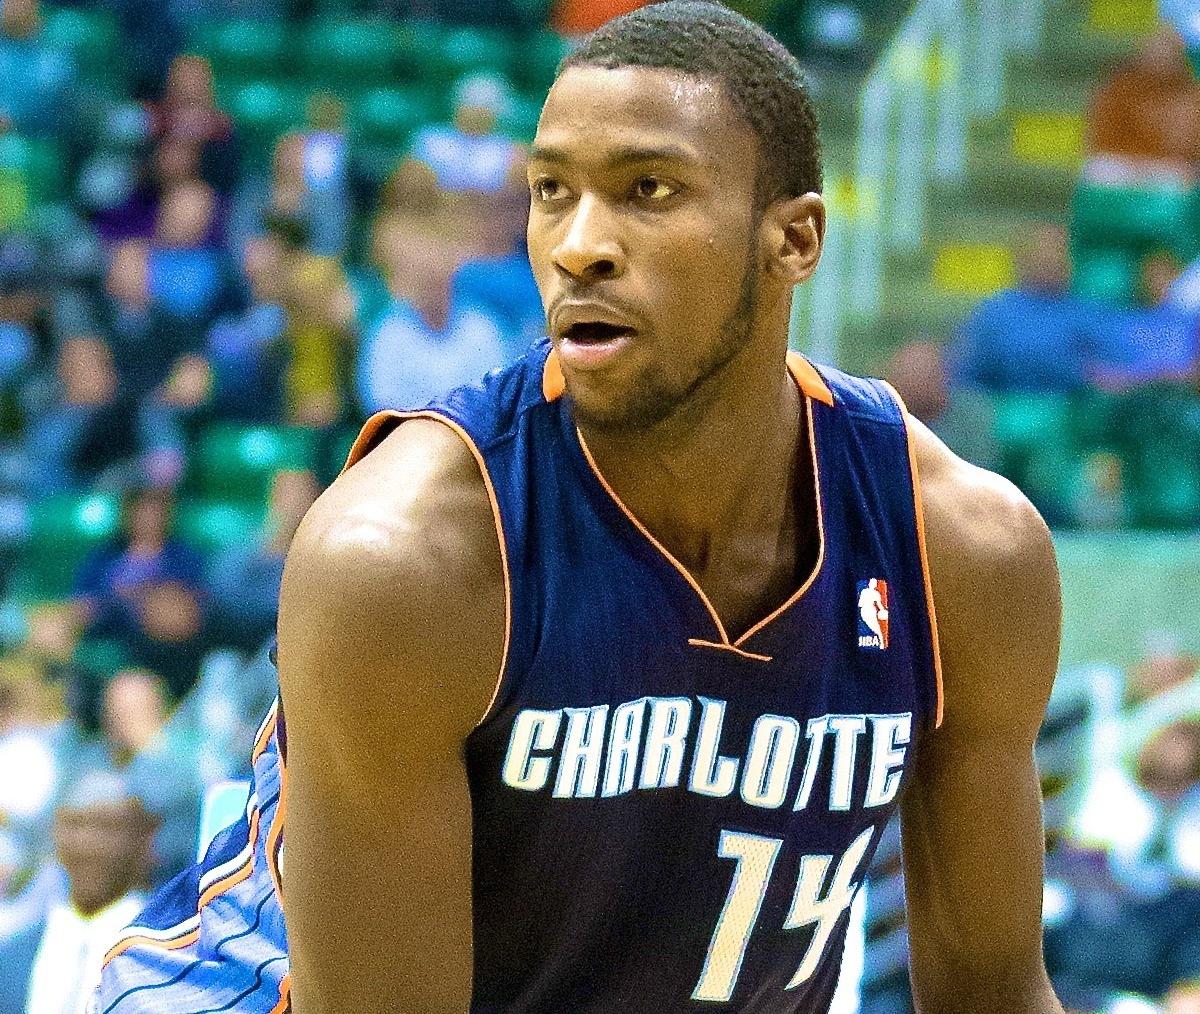 How Michael Kidd-Gilchrist Can Avoid Being the Next Big NBA Draft Bust